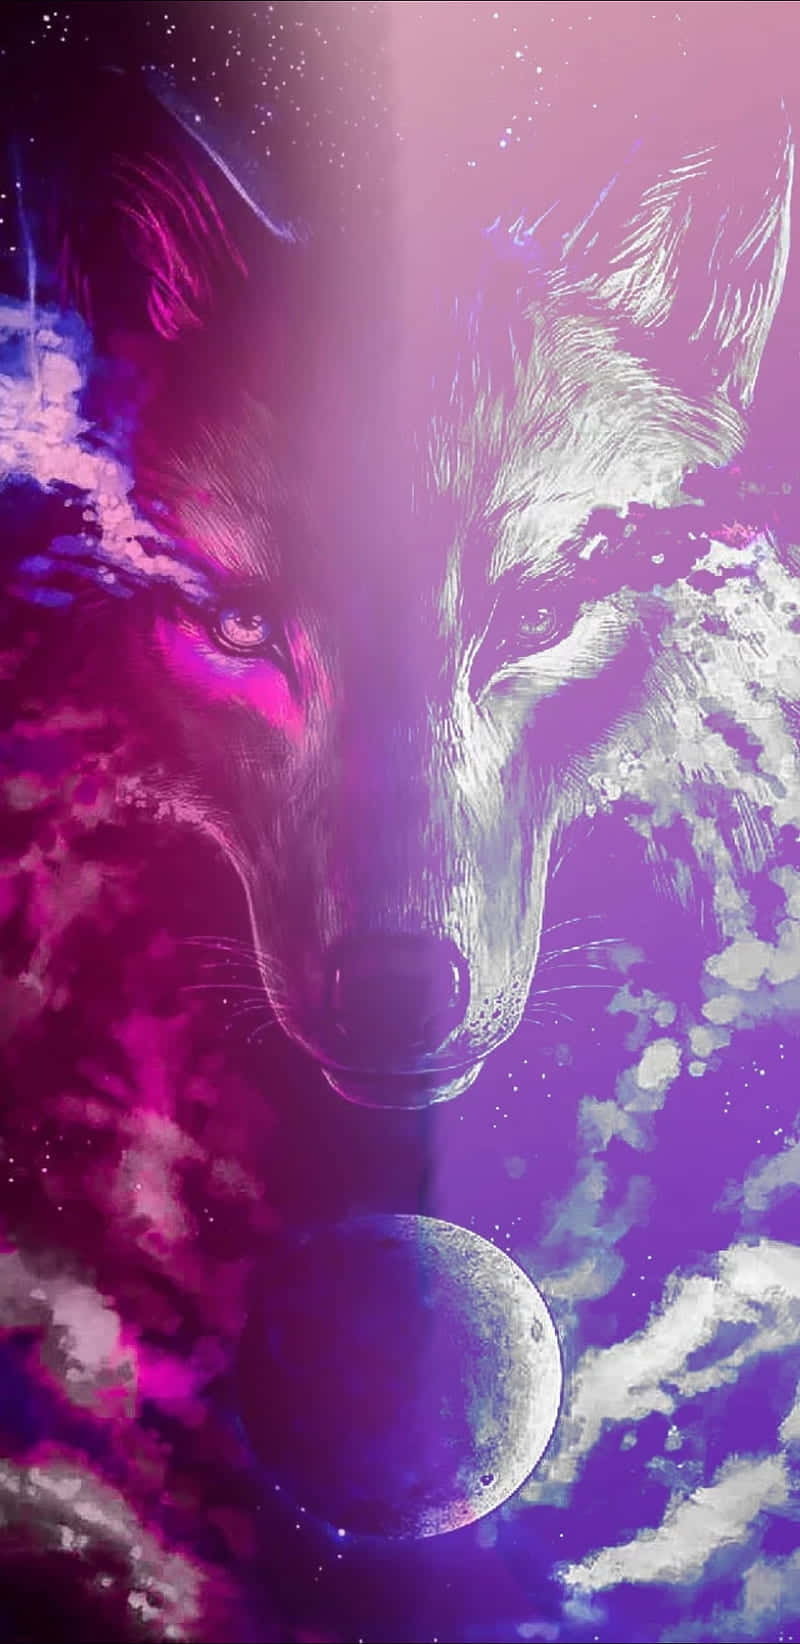 A majestic pink wolf under the magical northern lights Wallpaper